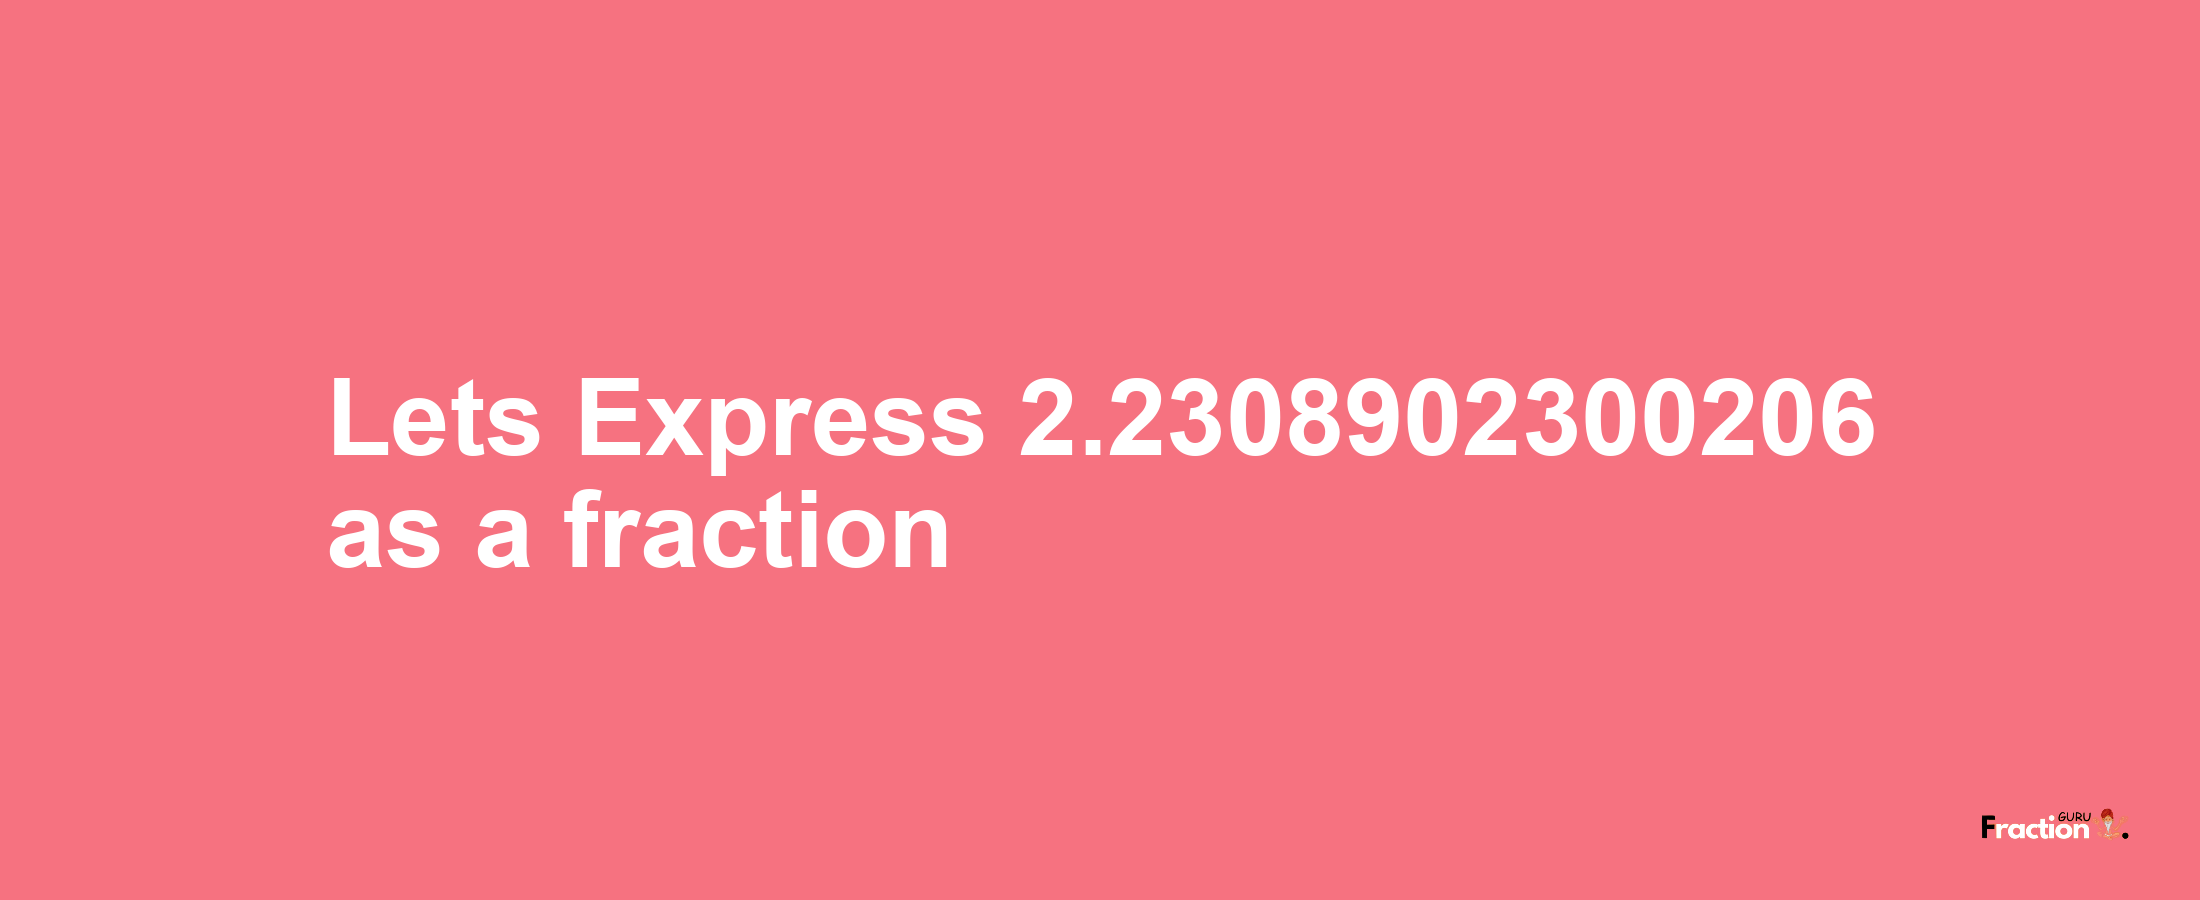 Lets Express 2.2308902300206 as afraction